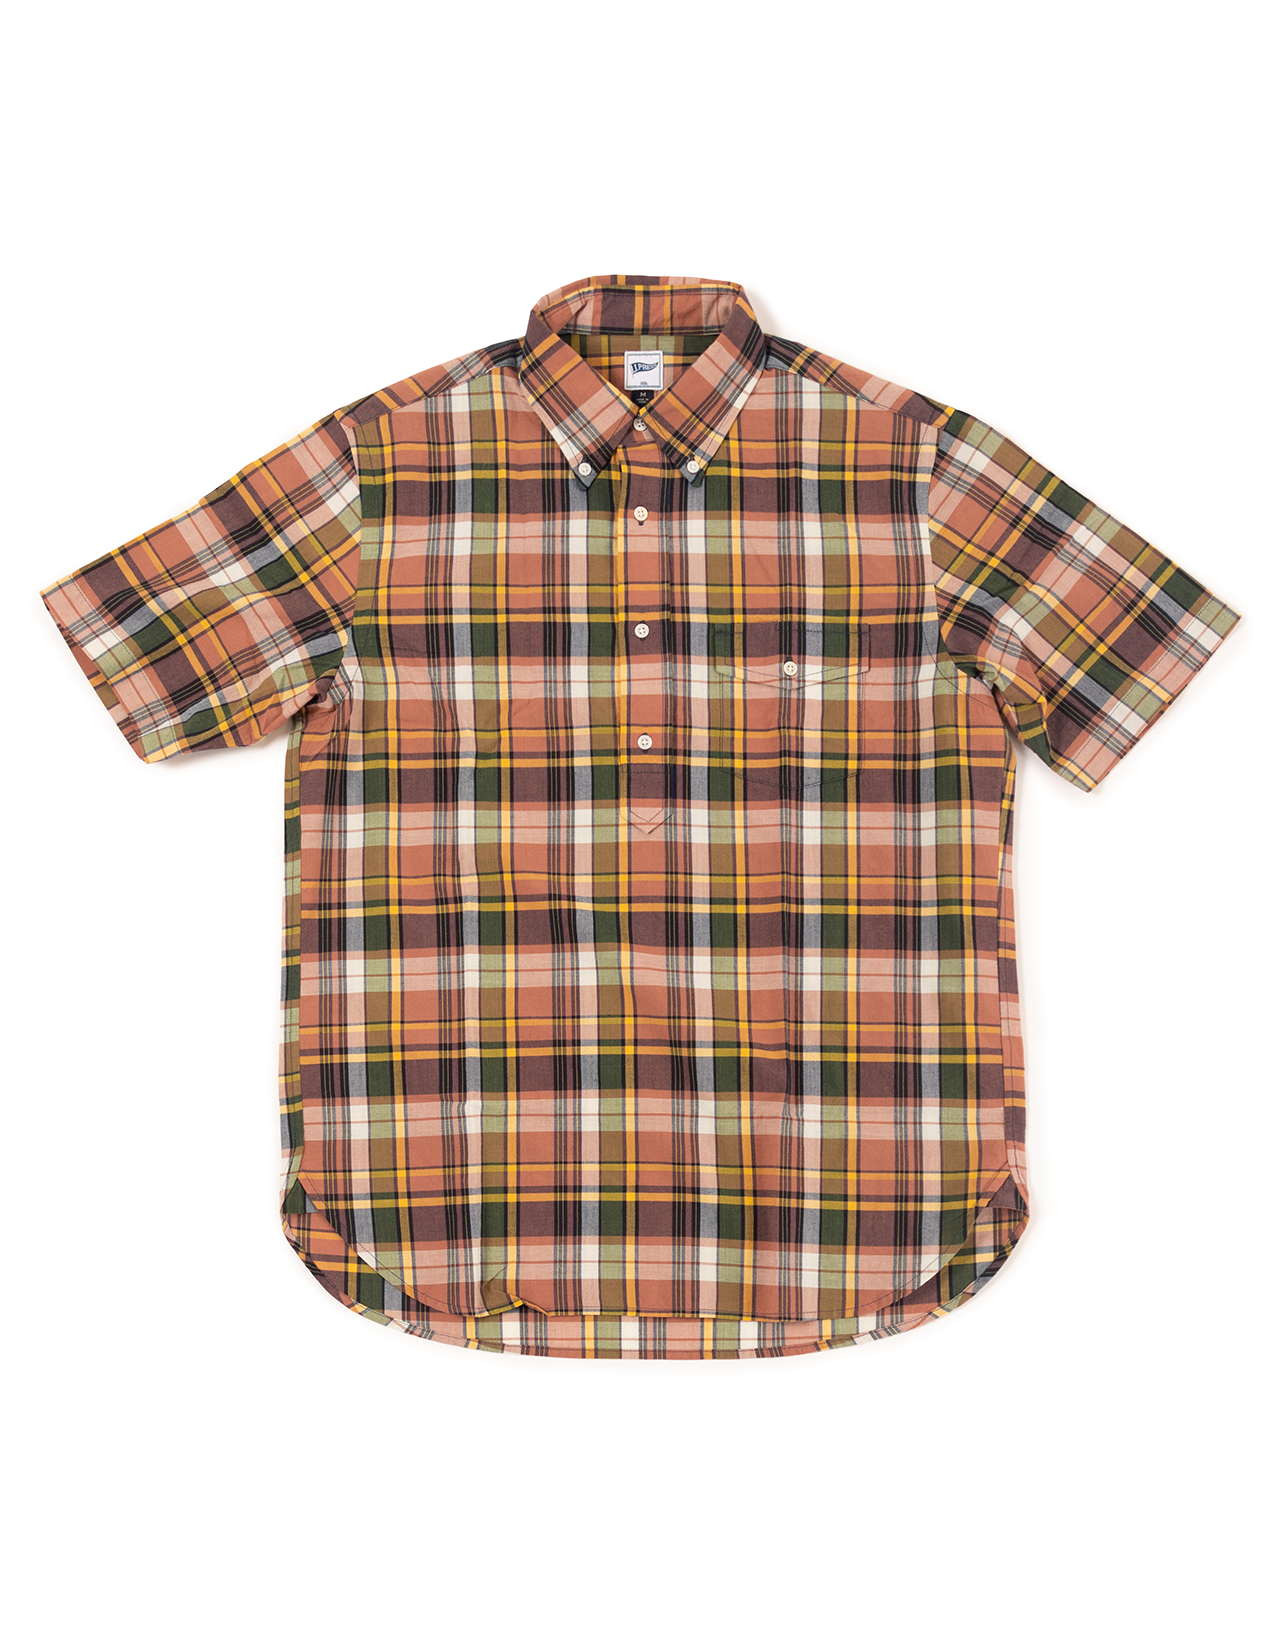 MADRAS POPOVER - BROWN/GREEN/YELLOW